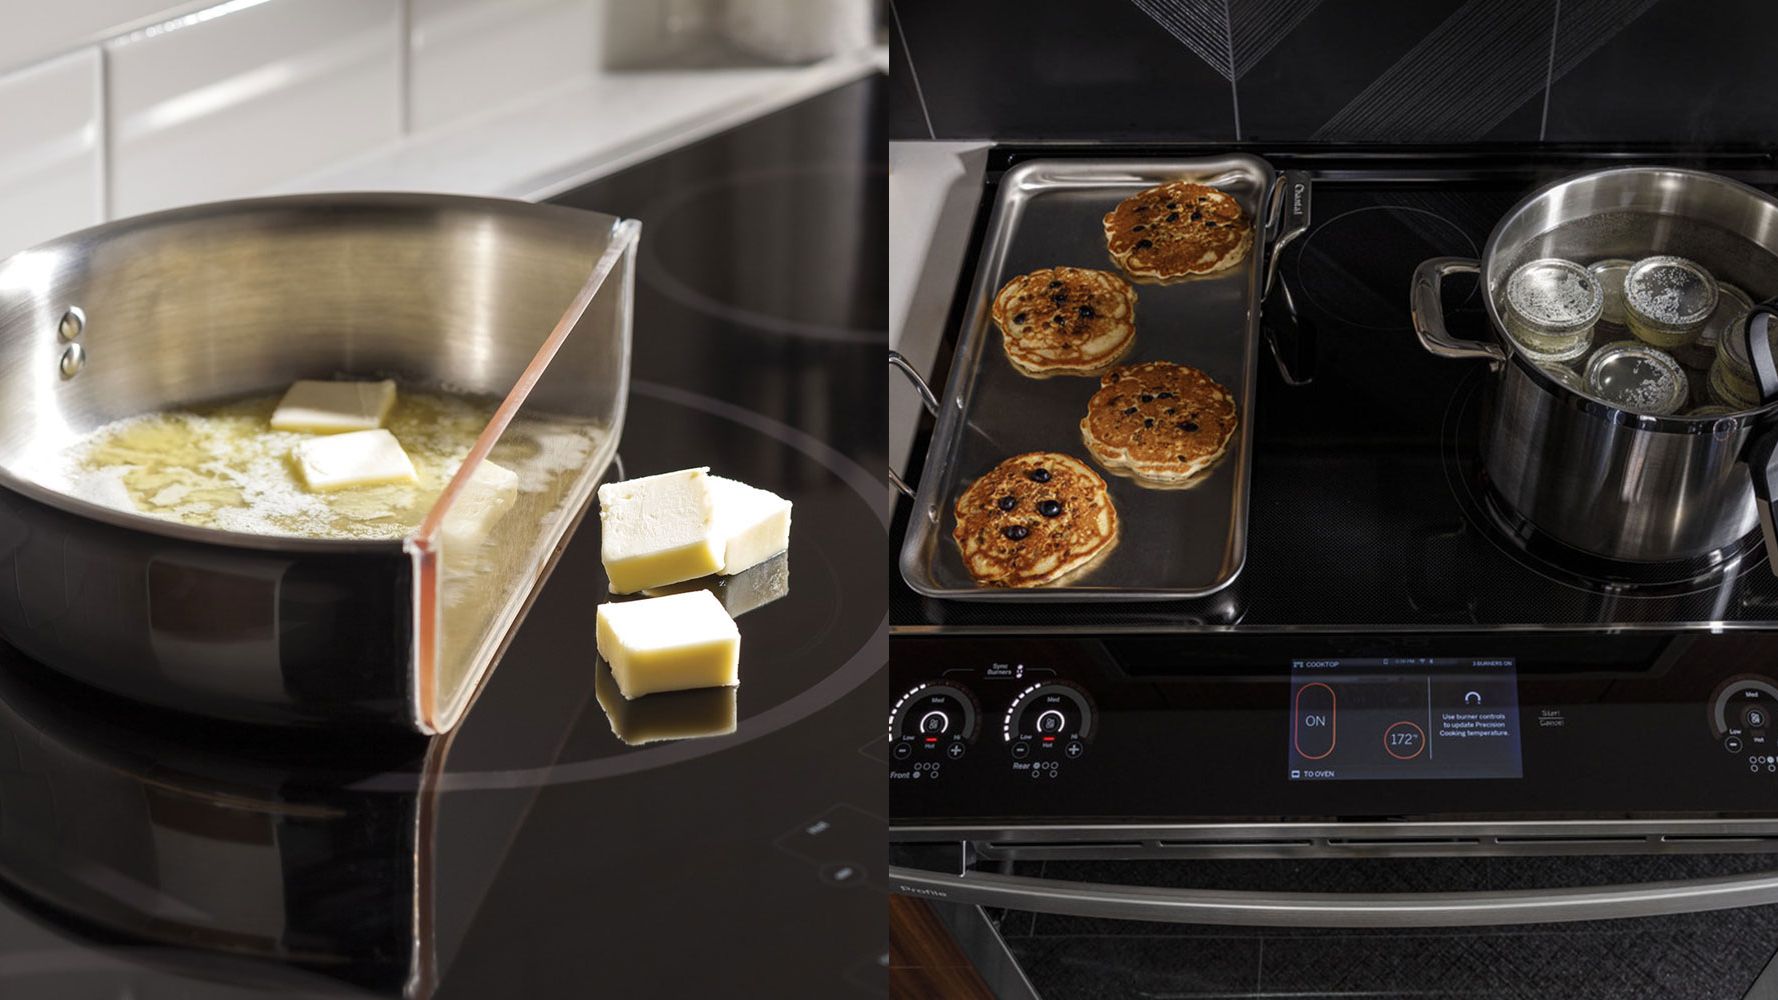 What Is Induction Cooking And How Does It Work?